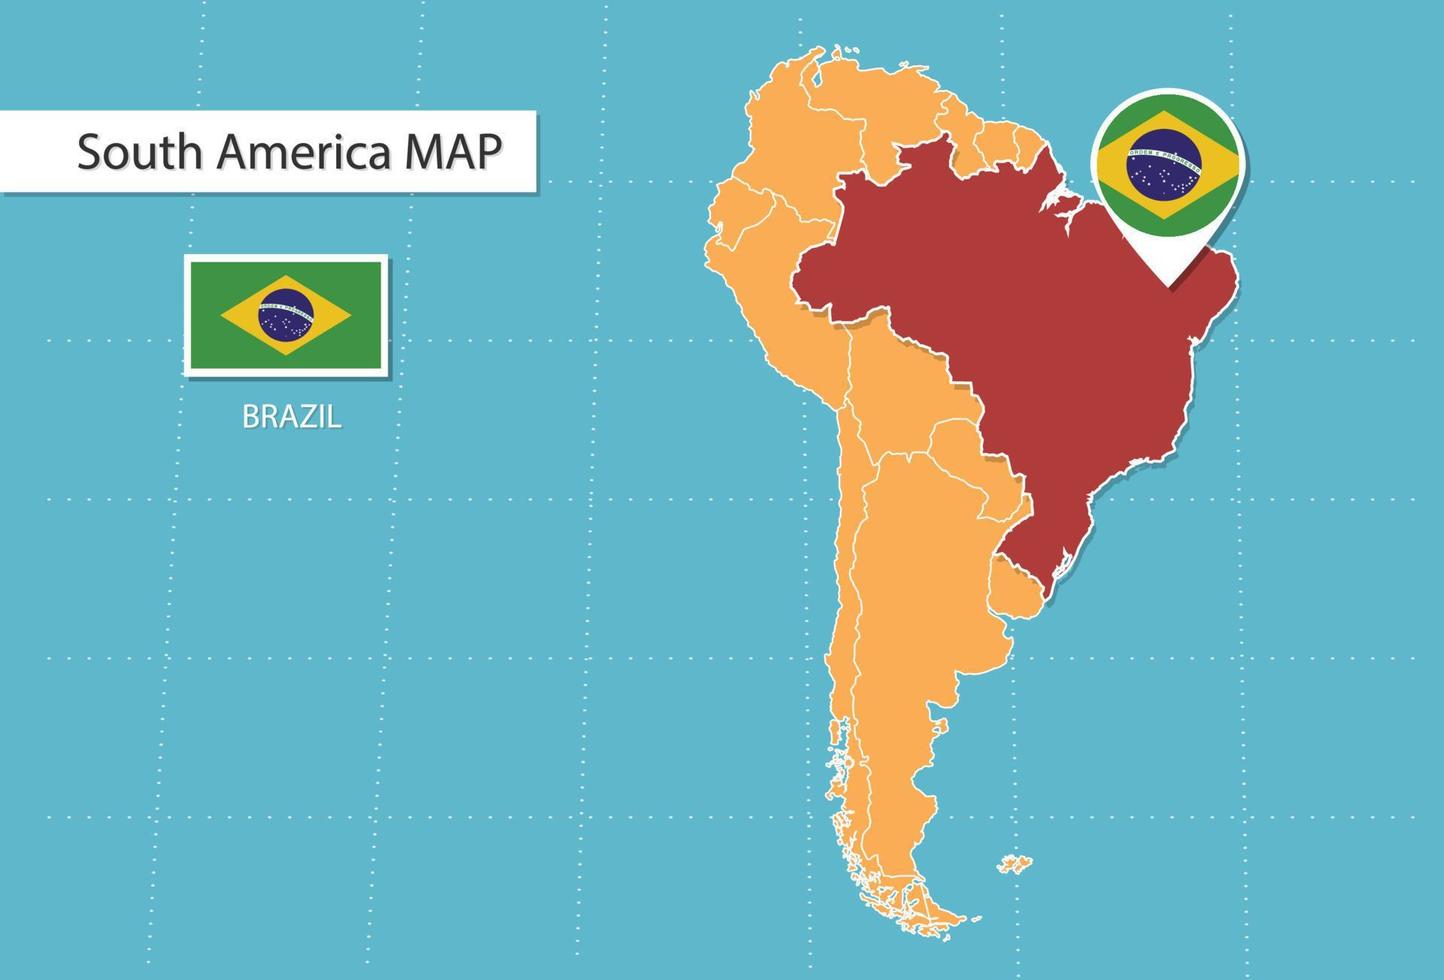 Brazil map in America, icons showing Brazil location and flags. vector